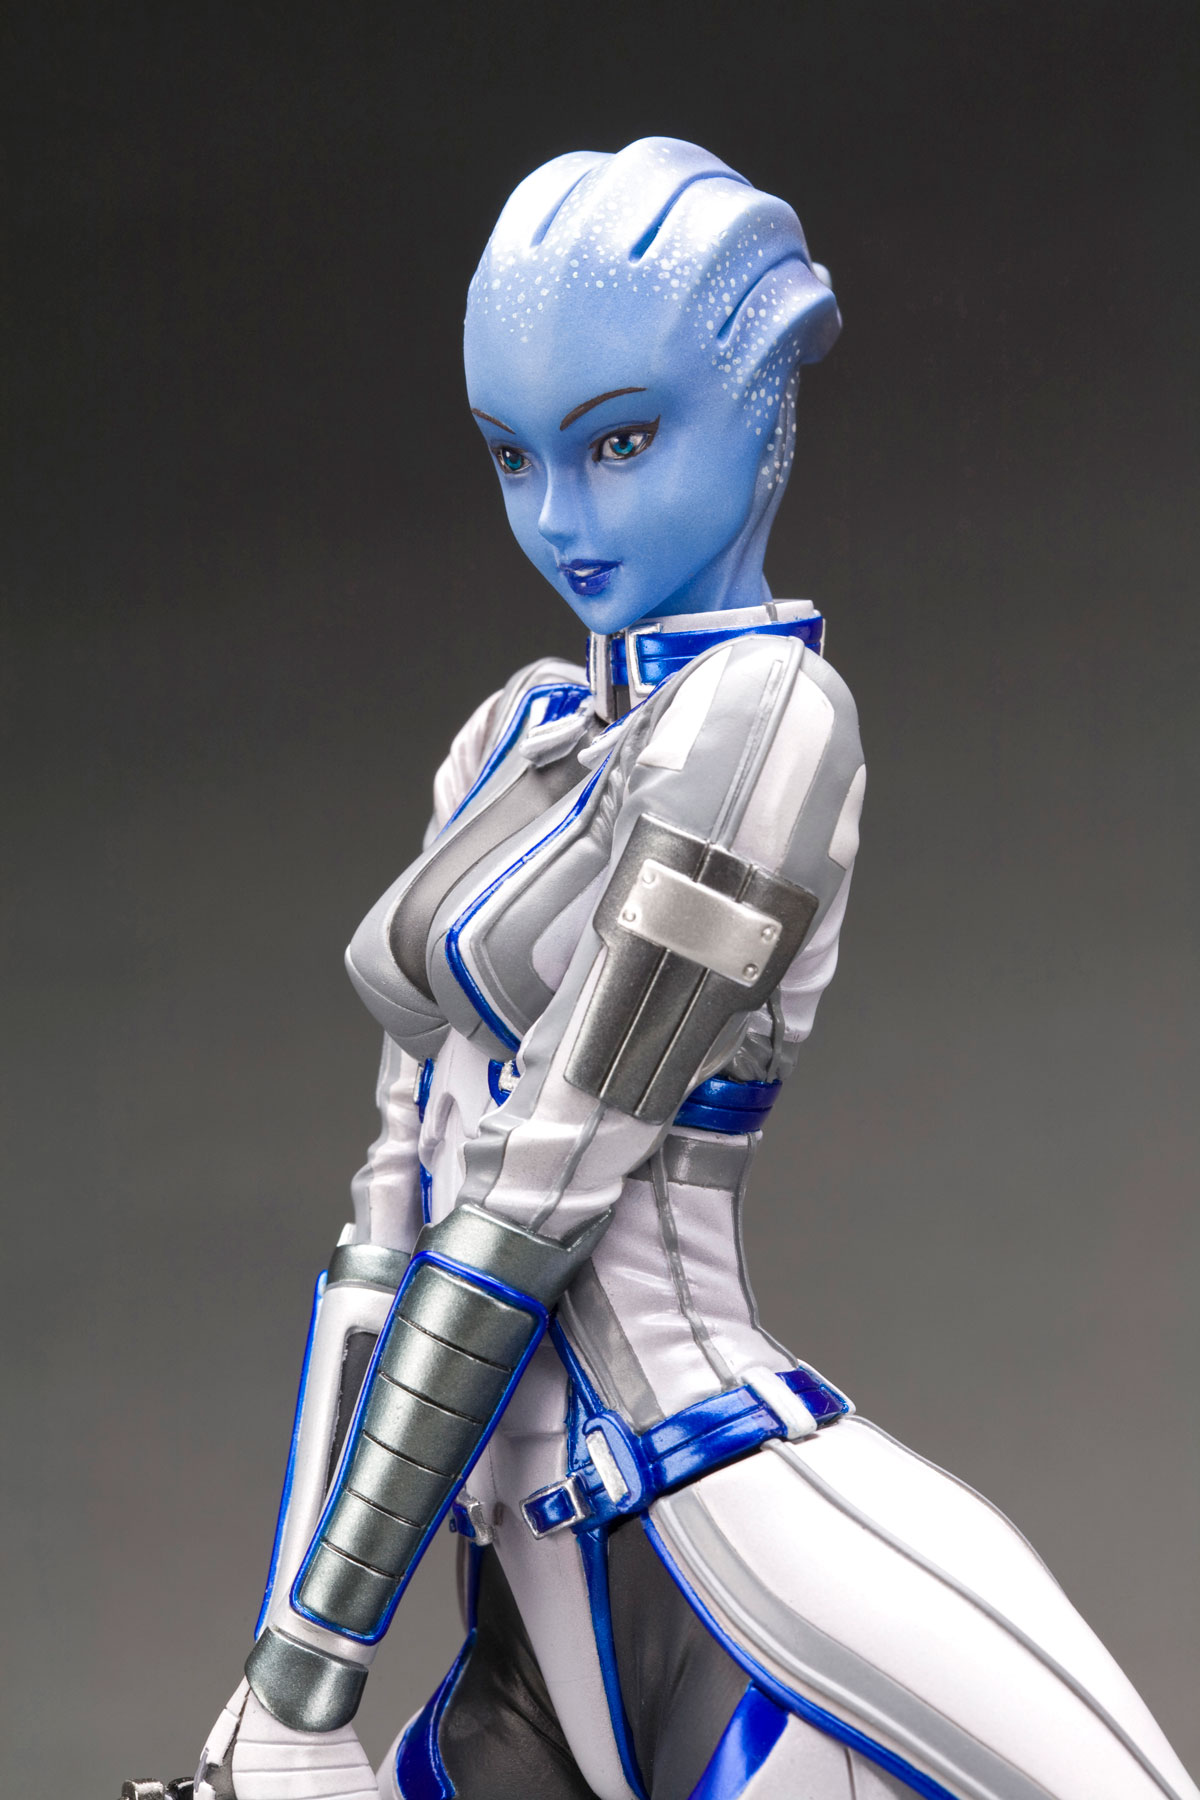 Dr. Liara T’Soni arrives in April 2012, and will set you back a mere $59.99...